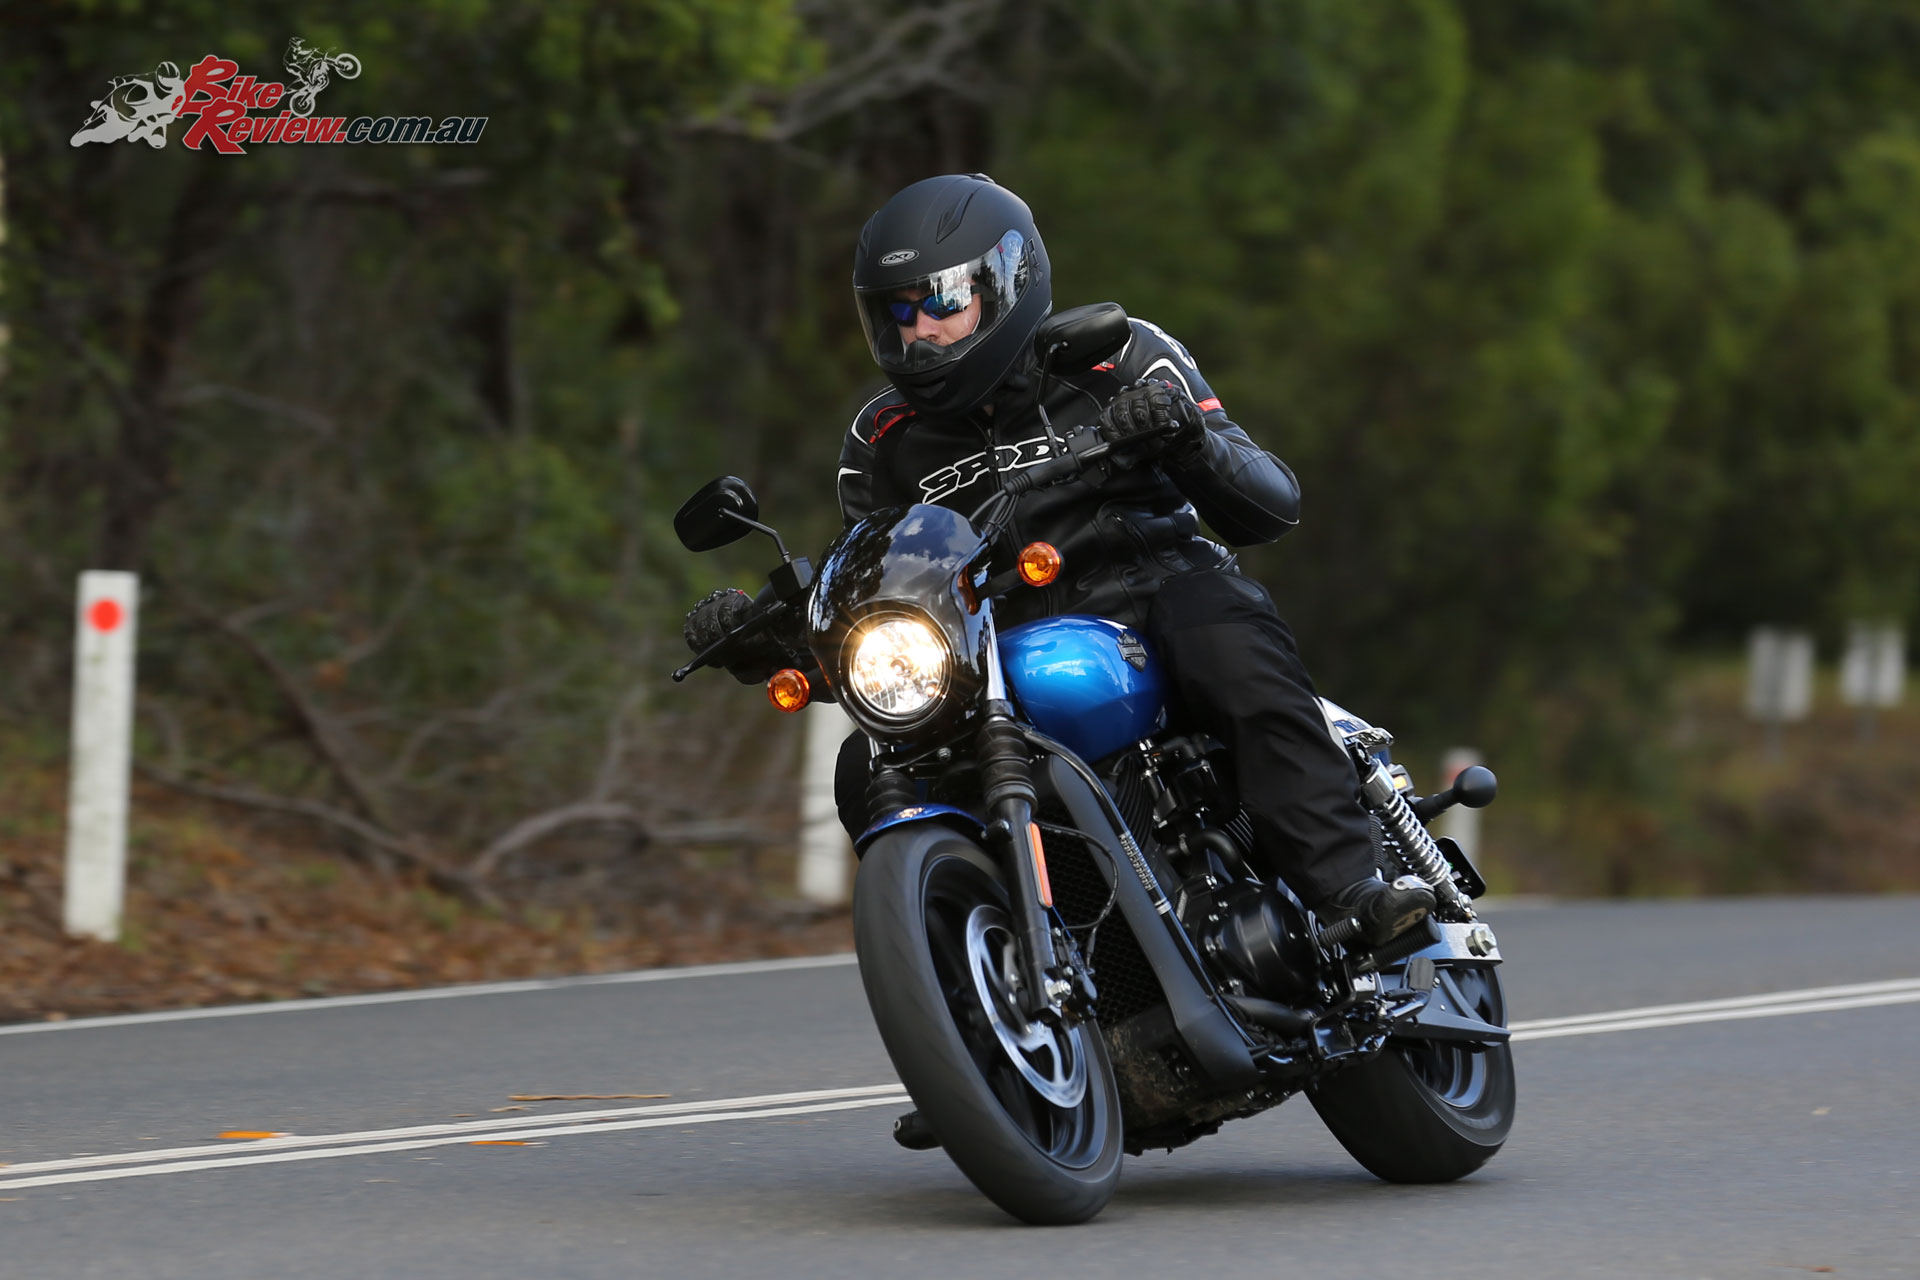 Overall the Street 500 impressed, offering a fun competent LAMS cruiser